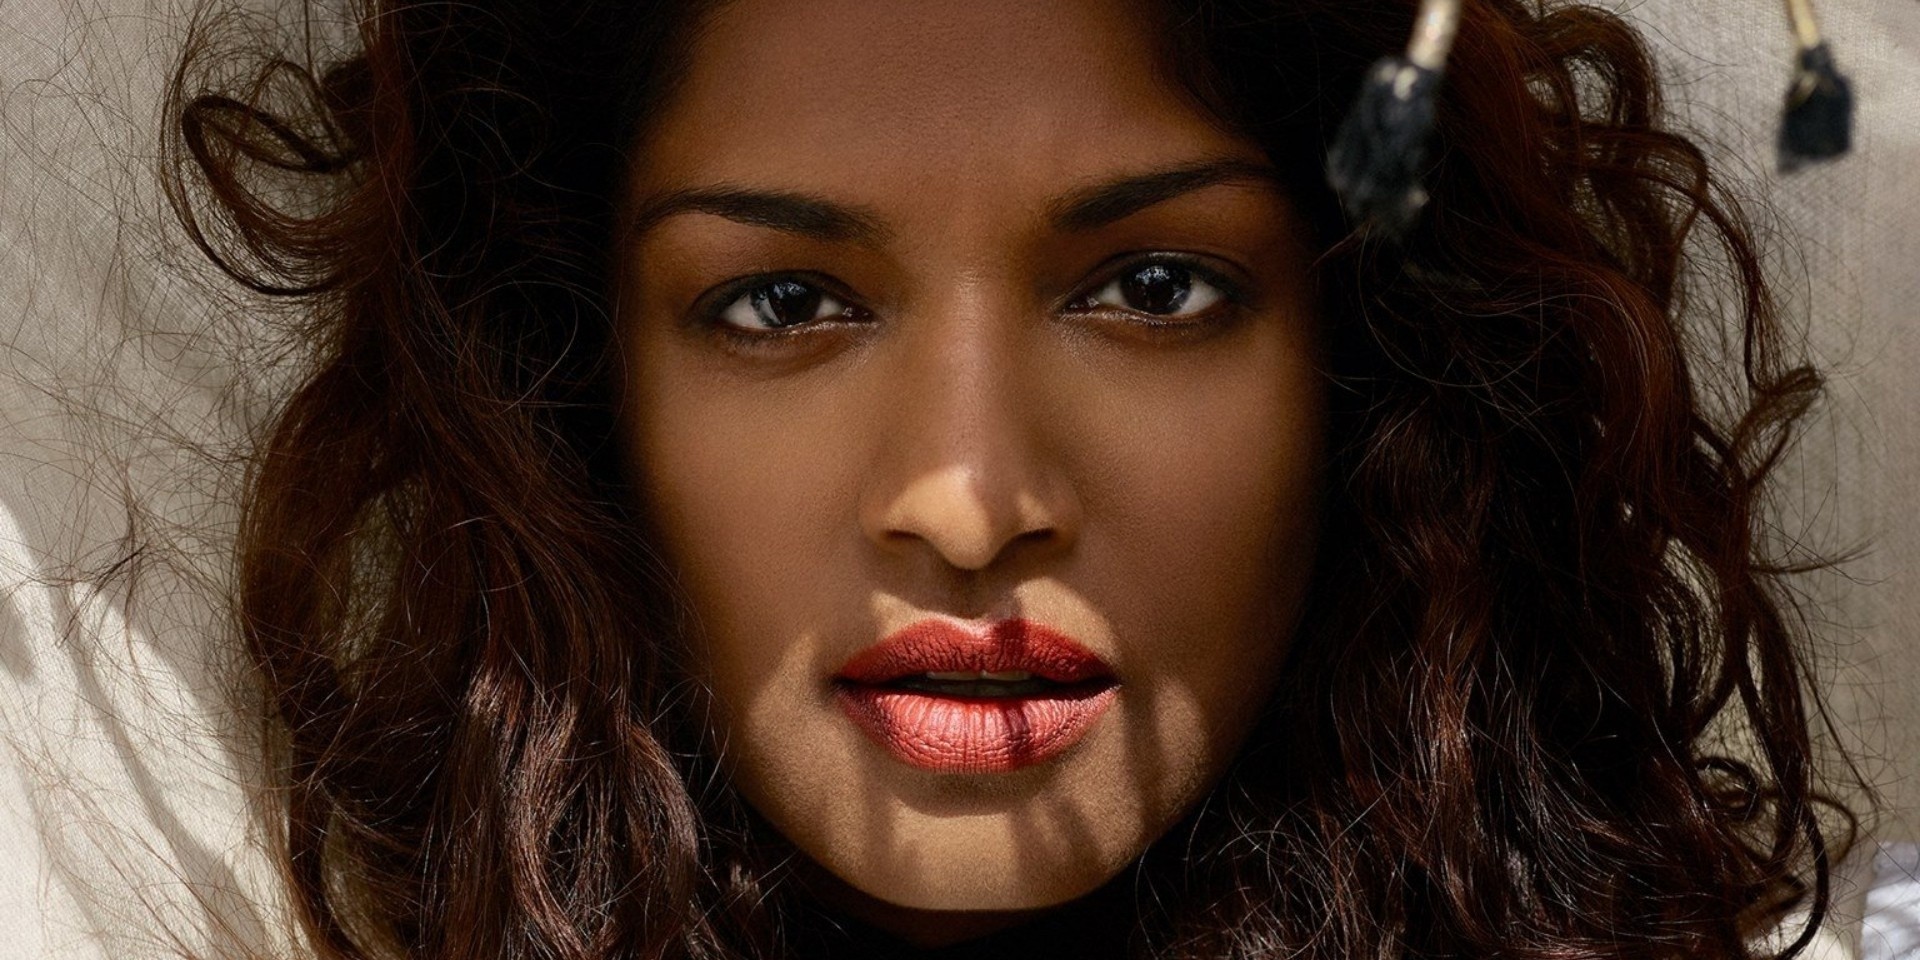 M.I.A. hints at quitting music because of censorship